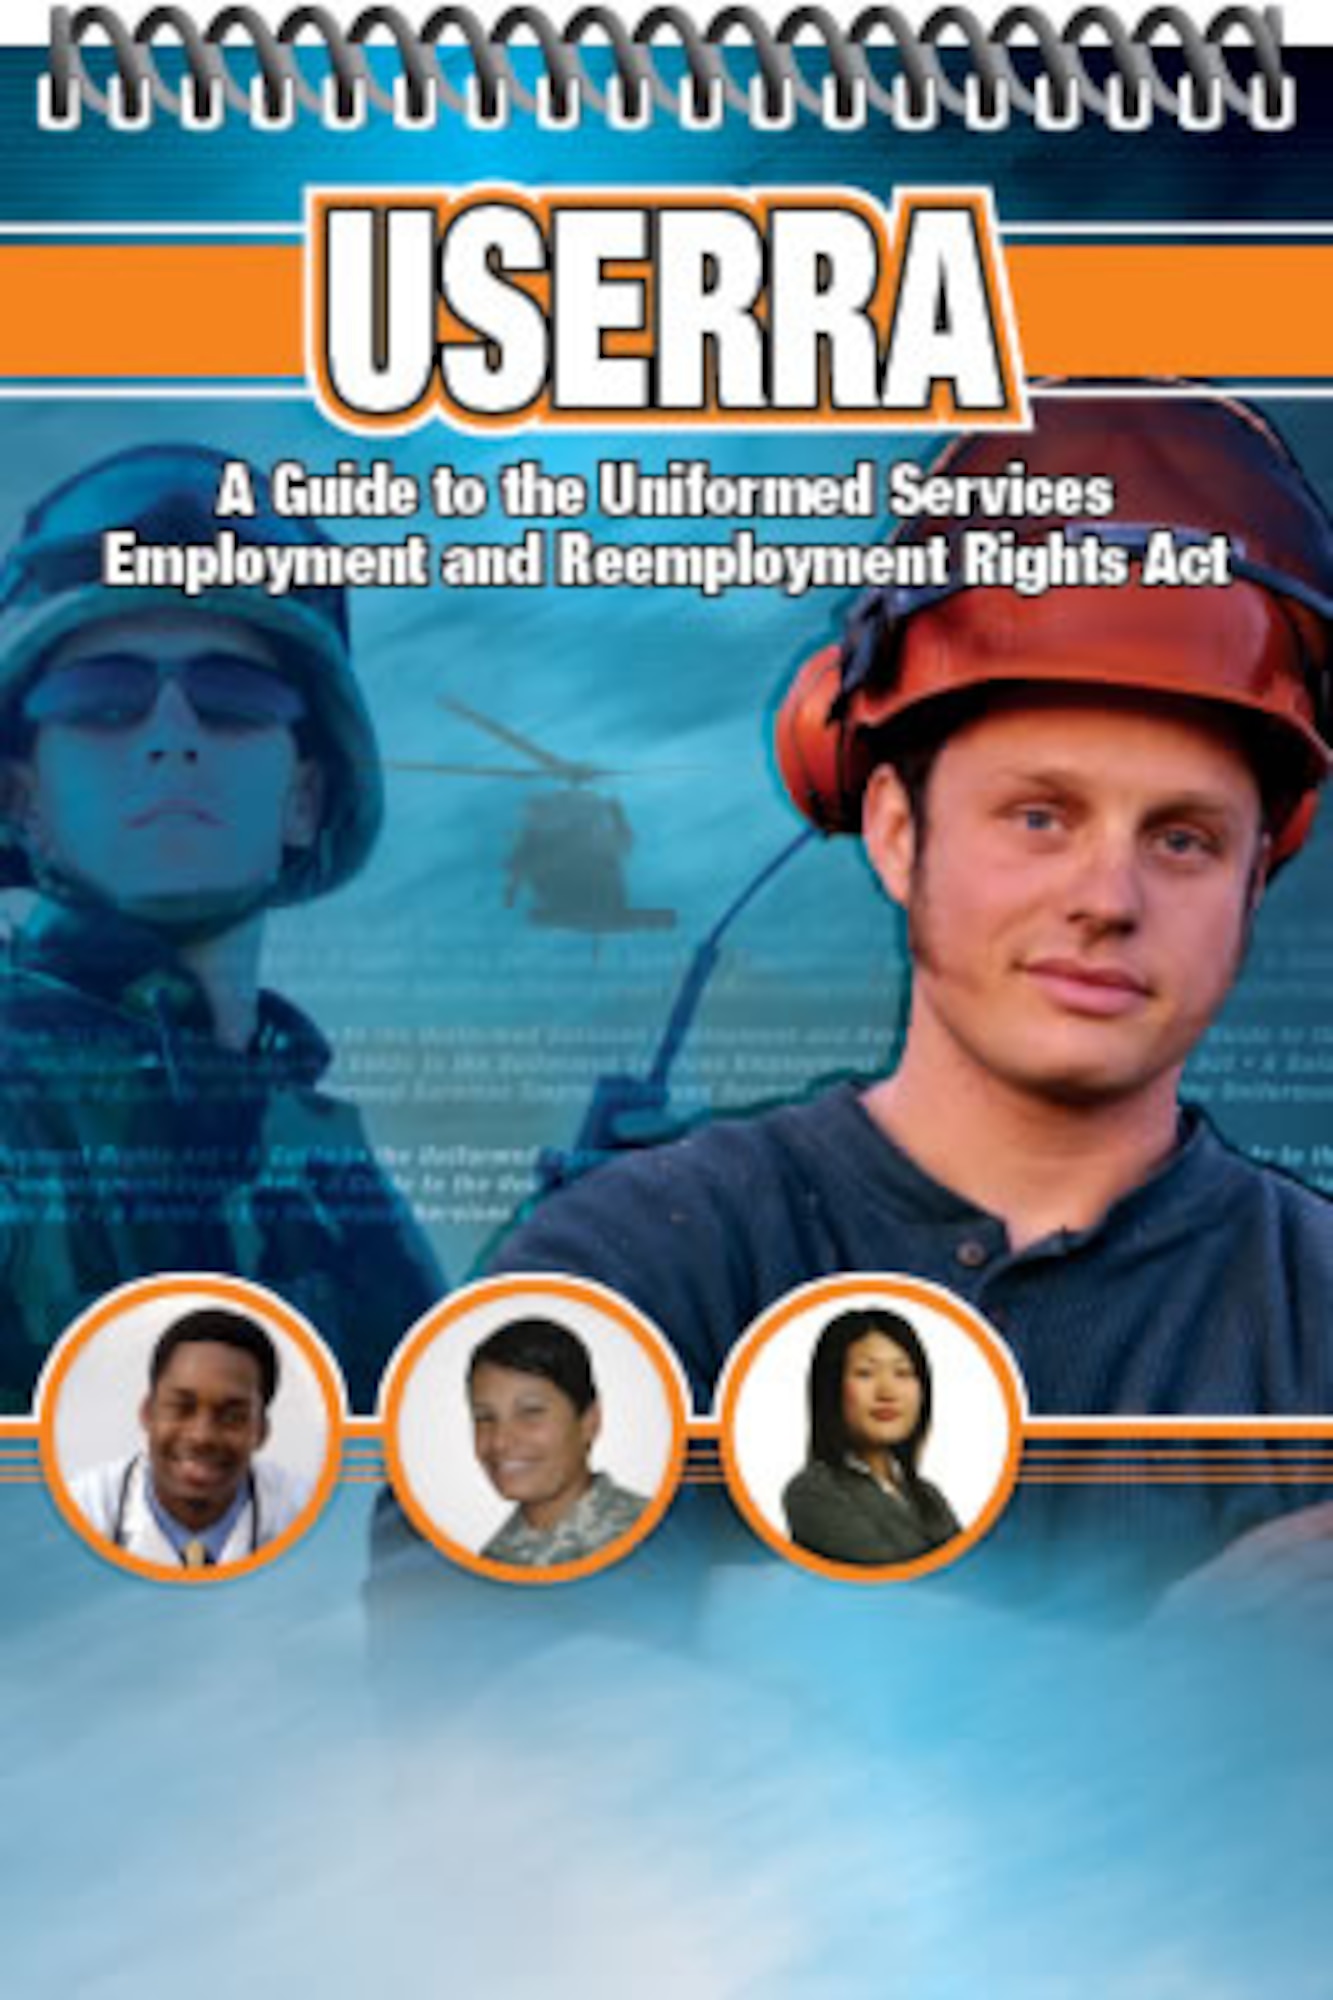 USERRA booklet for employers